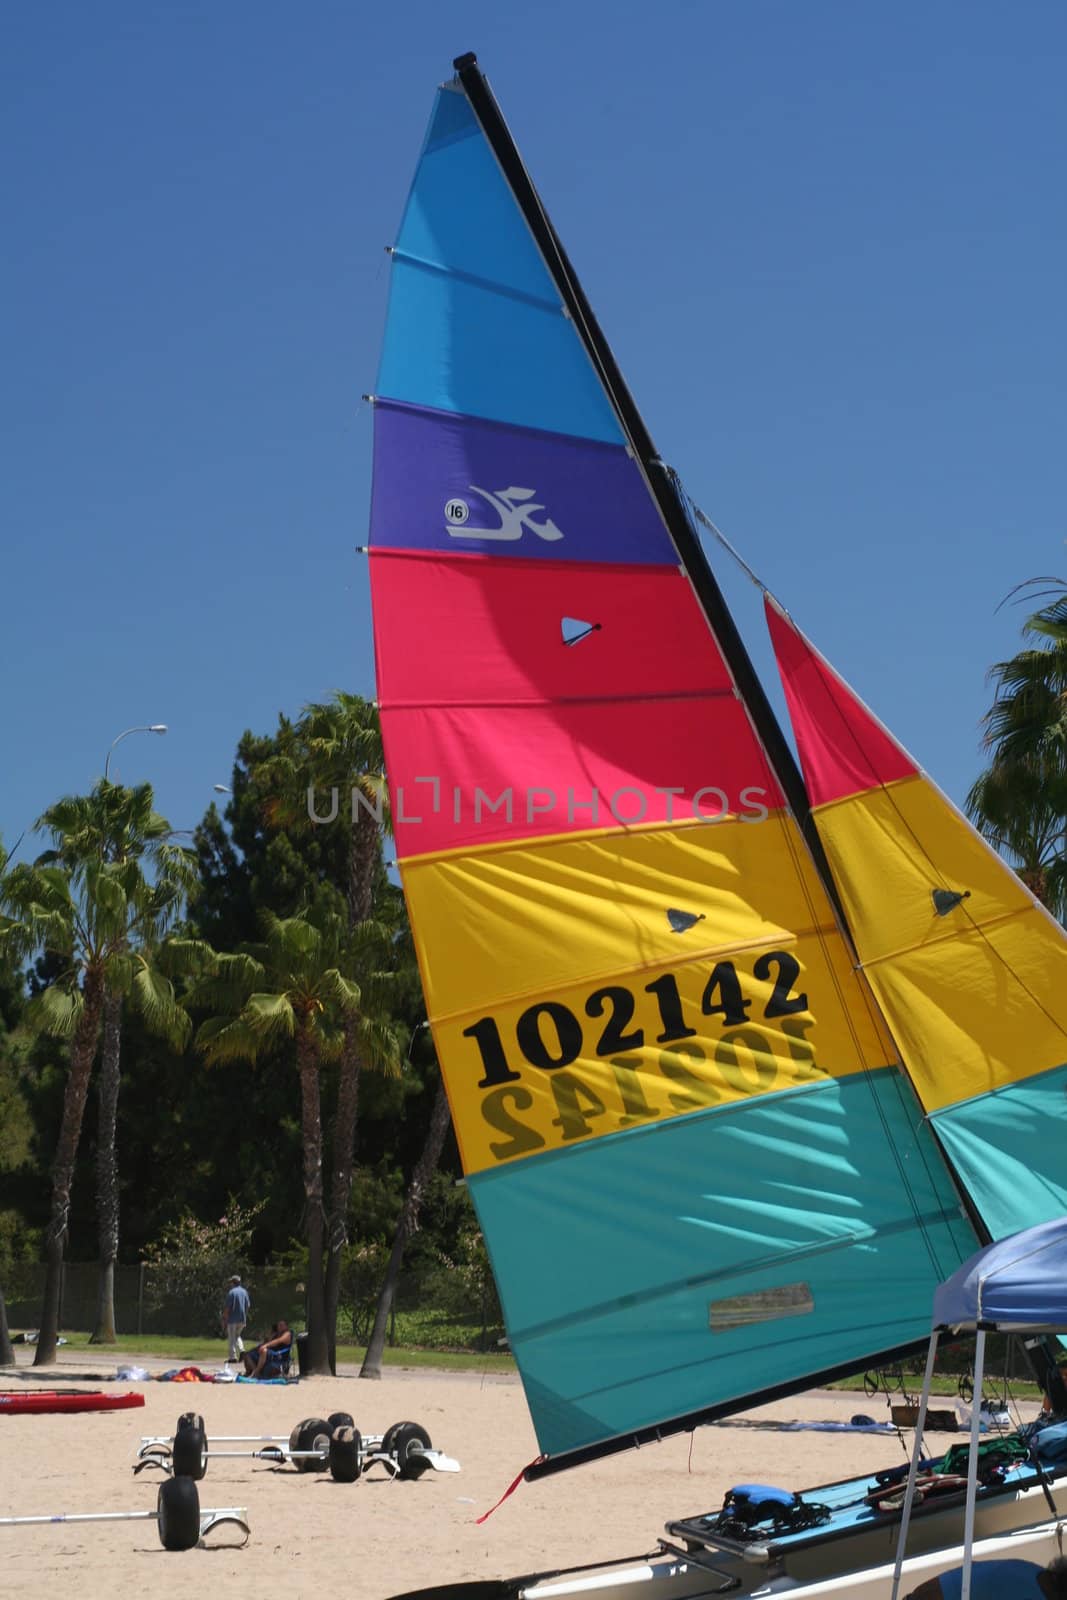 A color sail boat on a white sand beach.